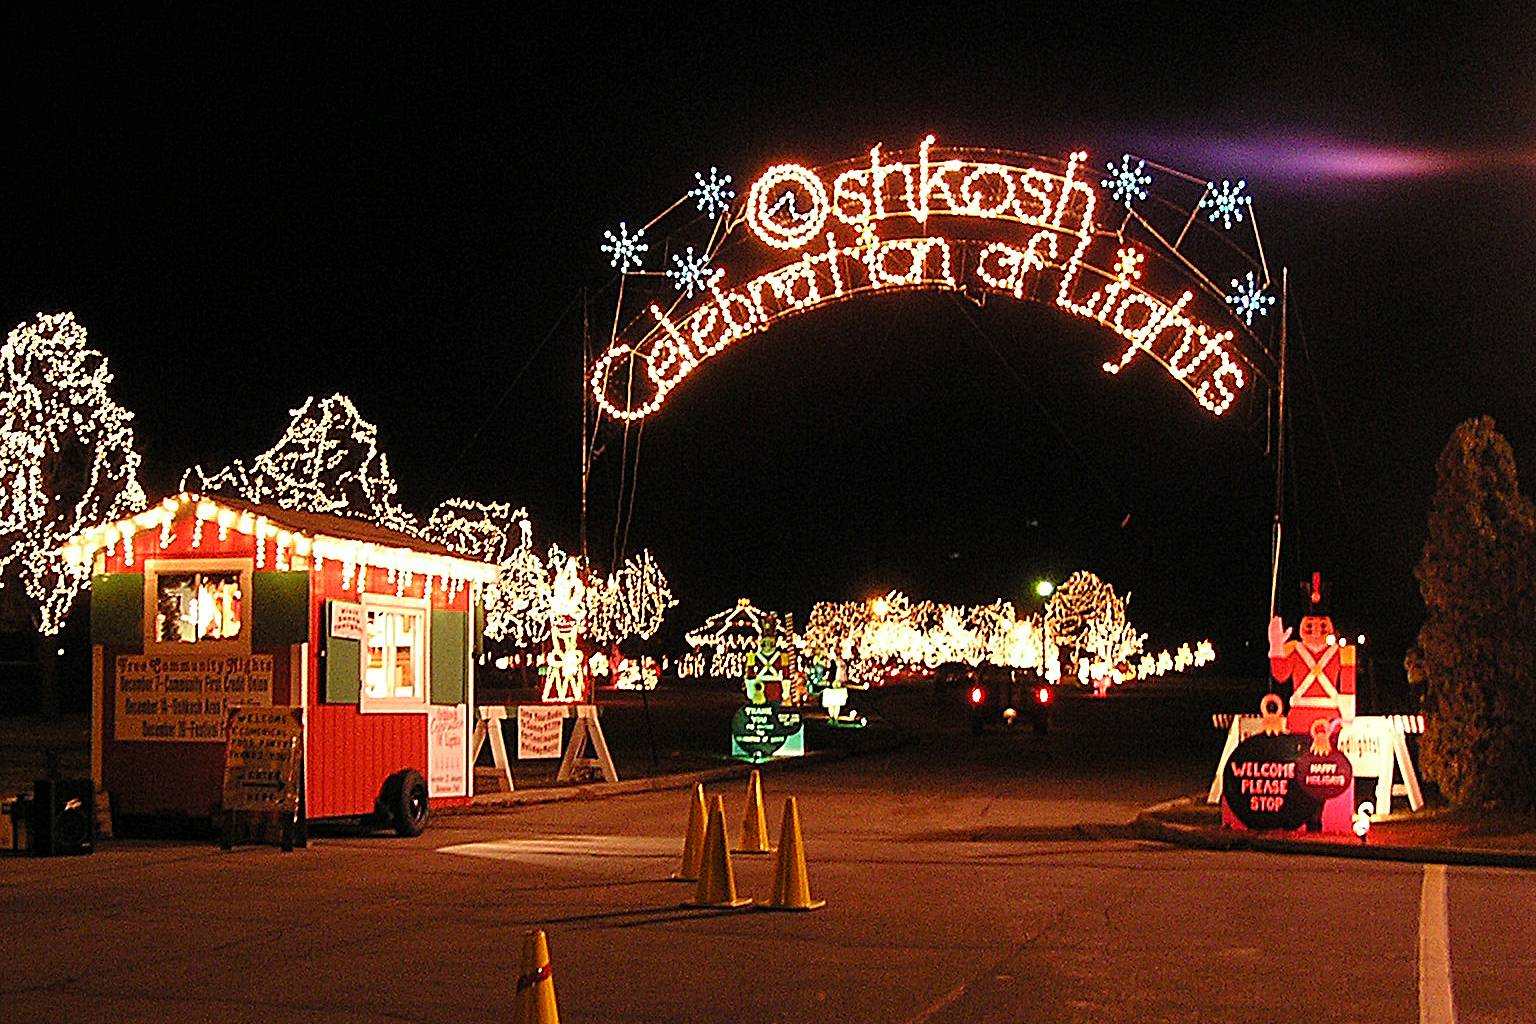 This is a photo of the entrance to the Oshkosh Celebration of Lights Festival